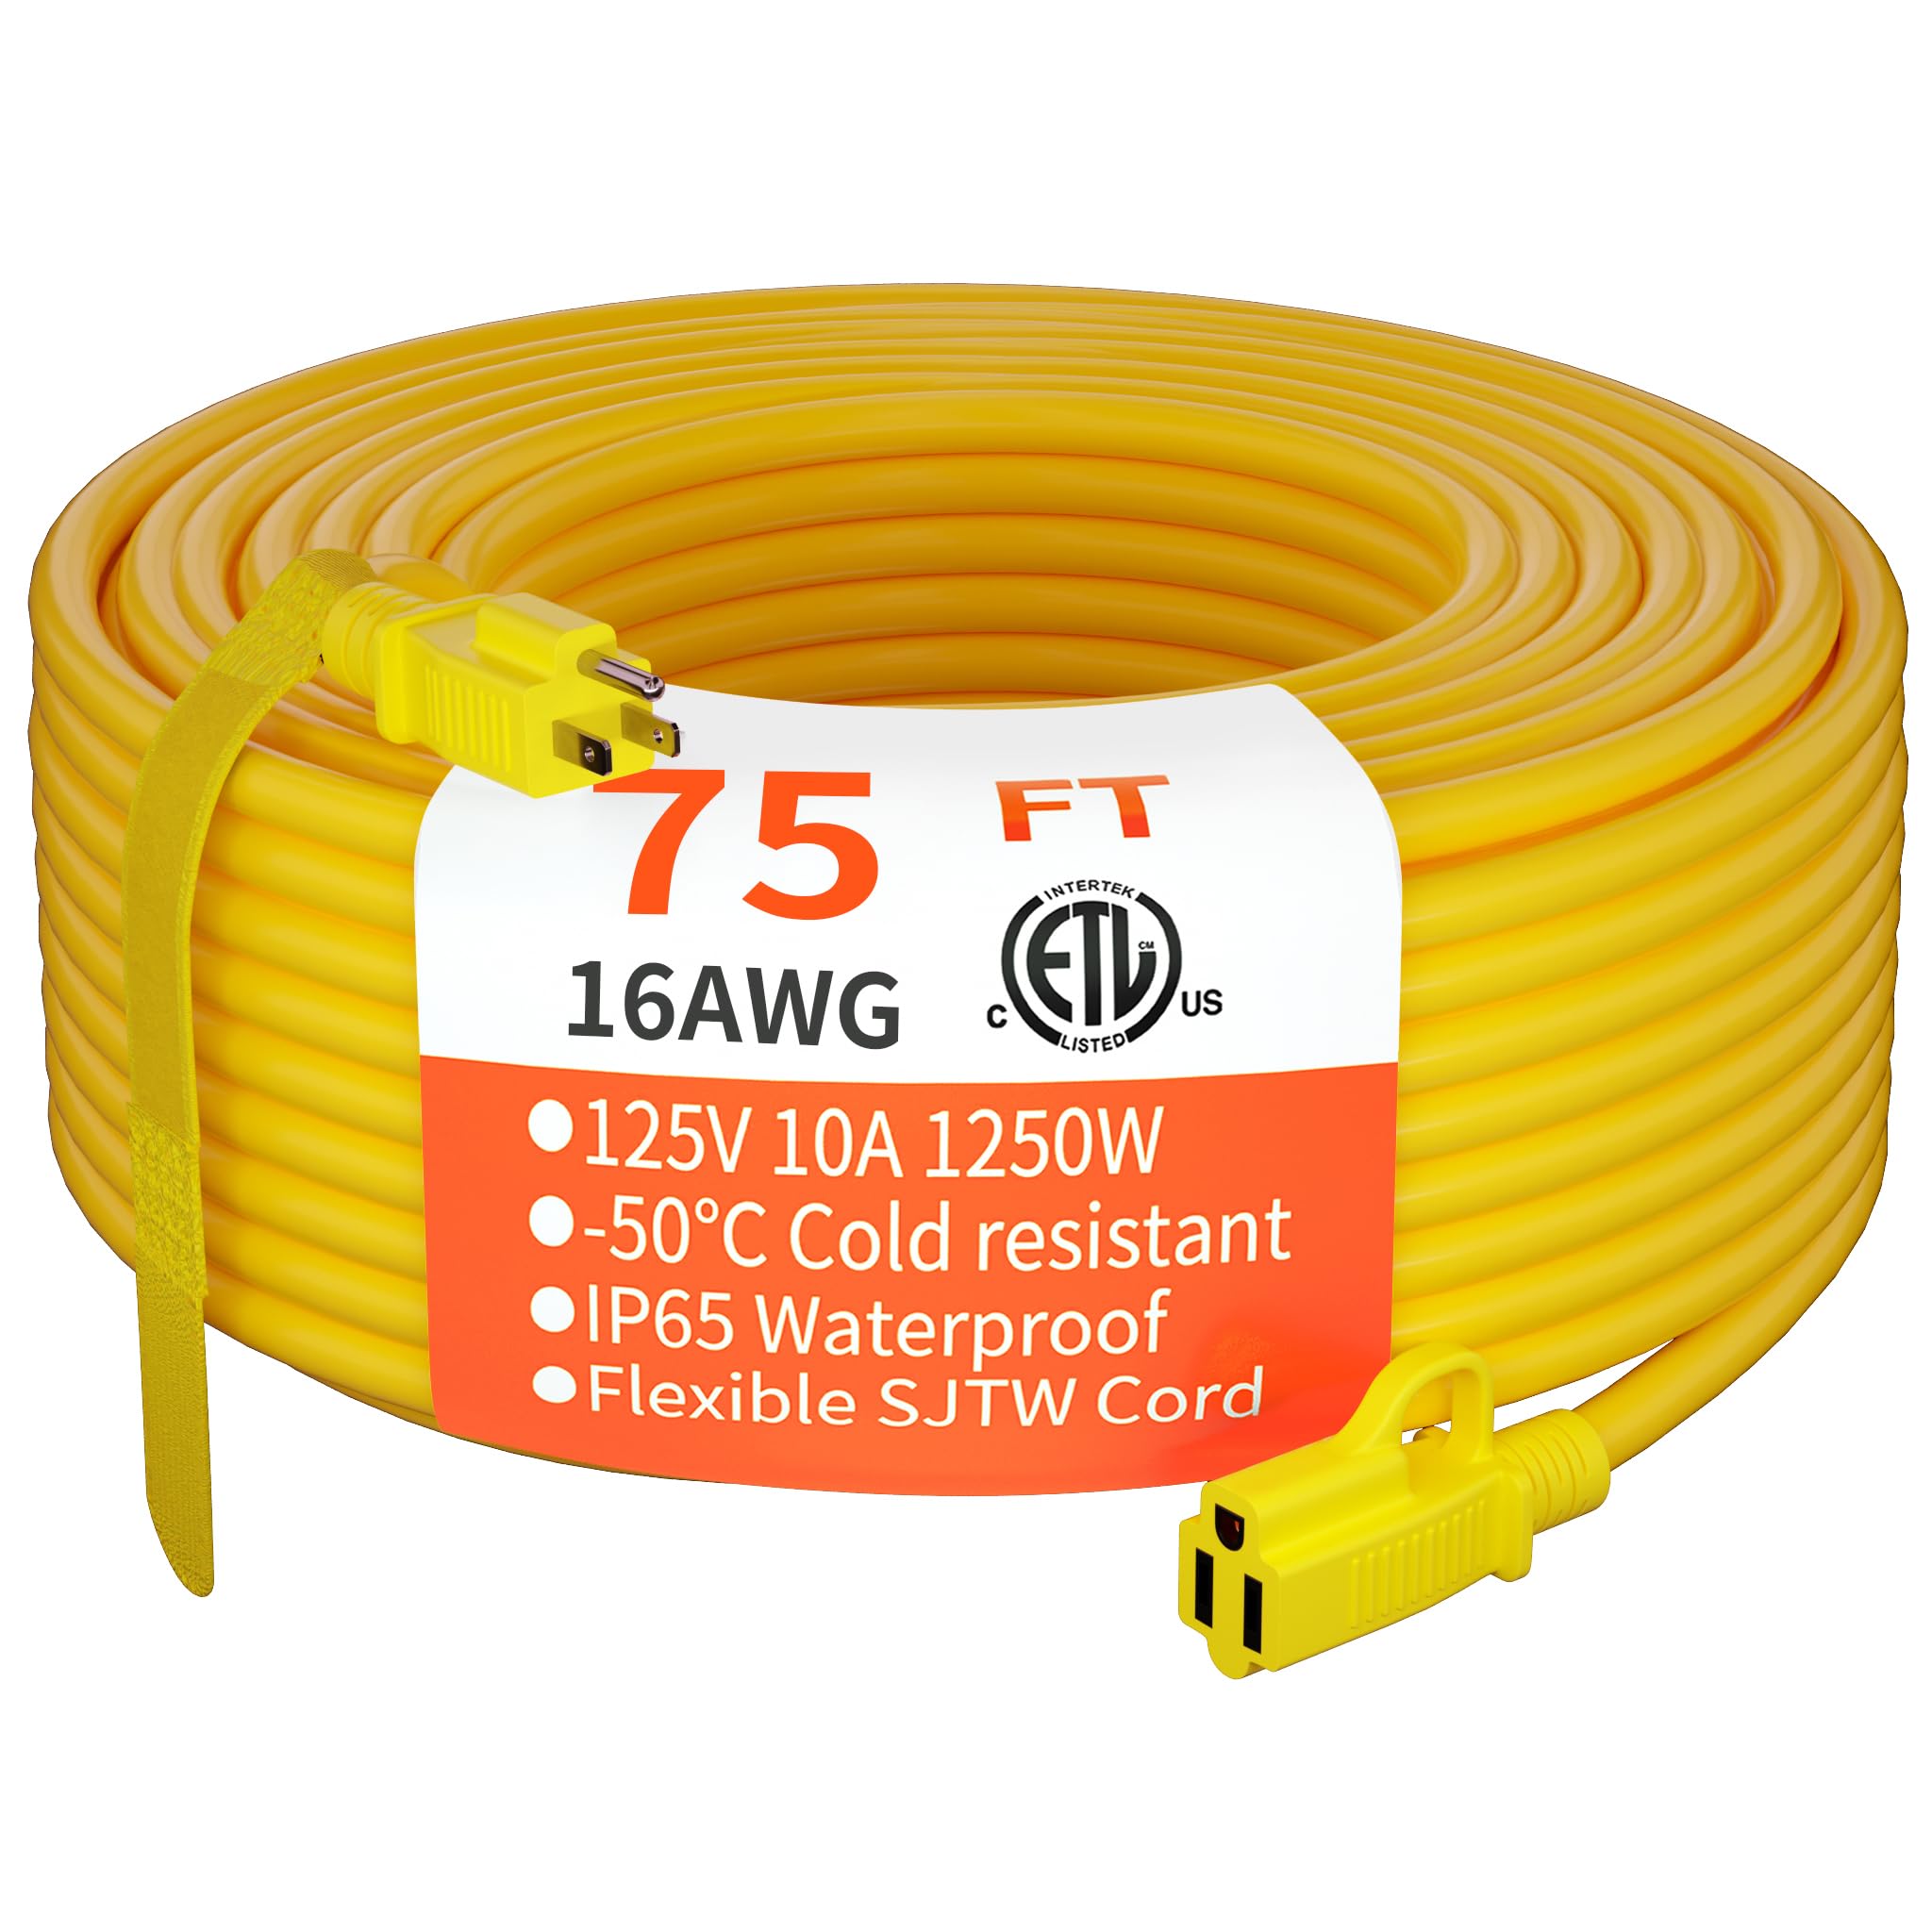 HUANCHAIN Outdoor Extension Cord 75 Foot Waterproof, 16/3 Gauge Flexible Cold-Resistant Appliance Extension Cord Outside, 10A 1250W 16AWG 